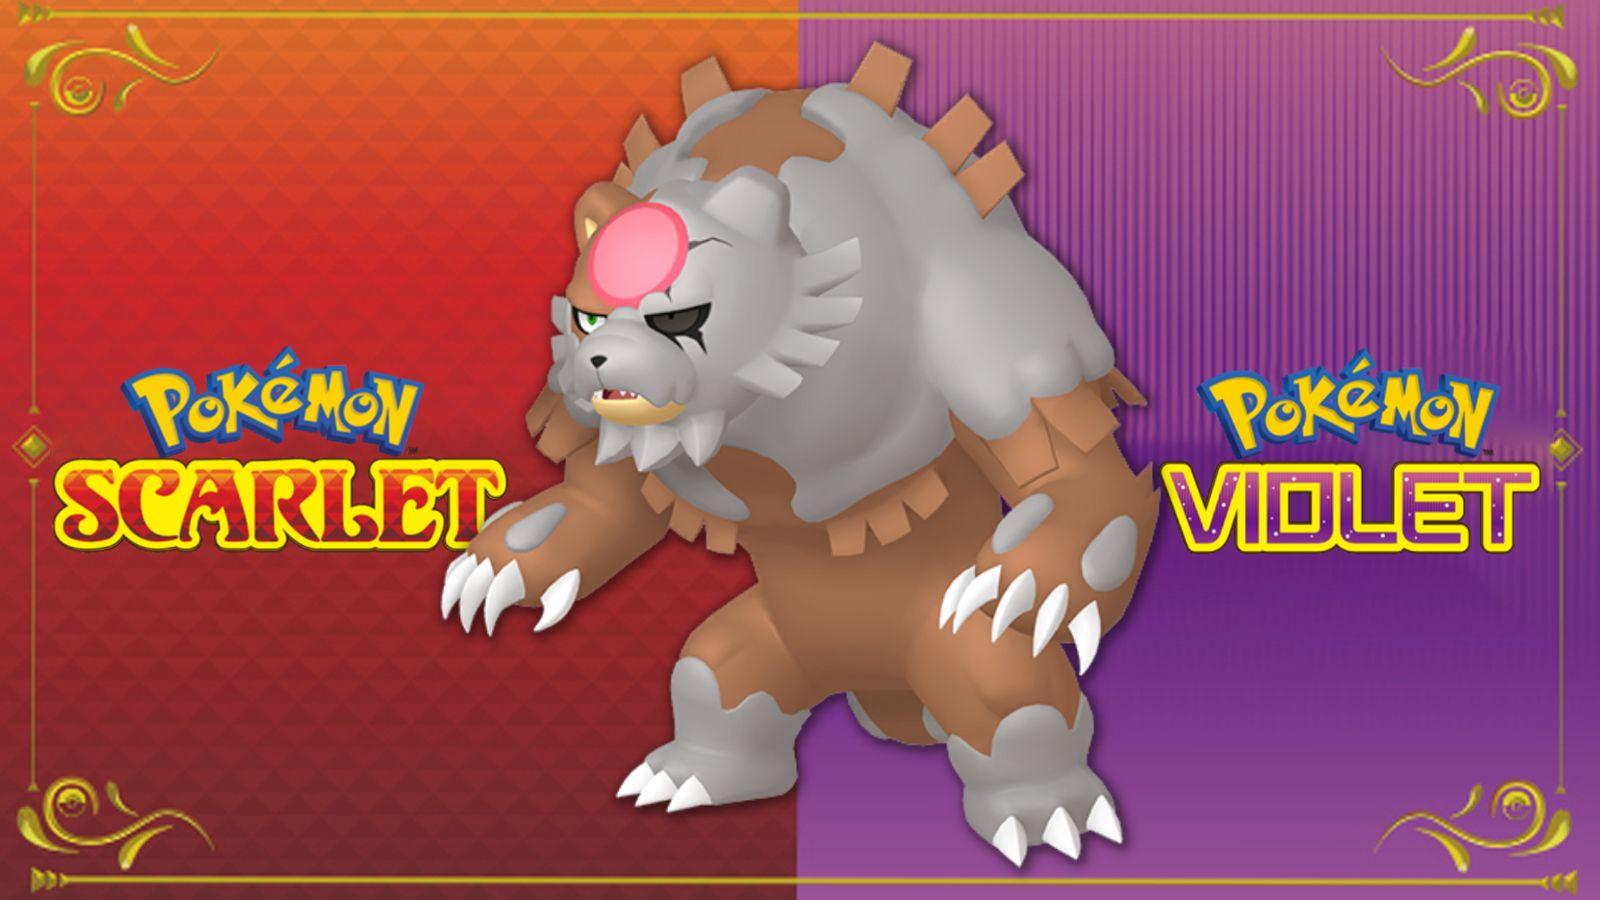 Current DLC mons that are coming back. Do note that this is based